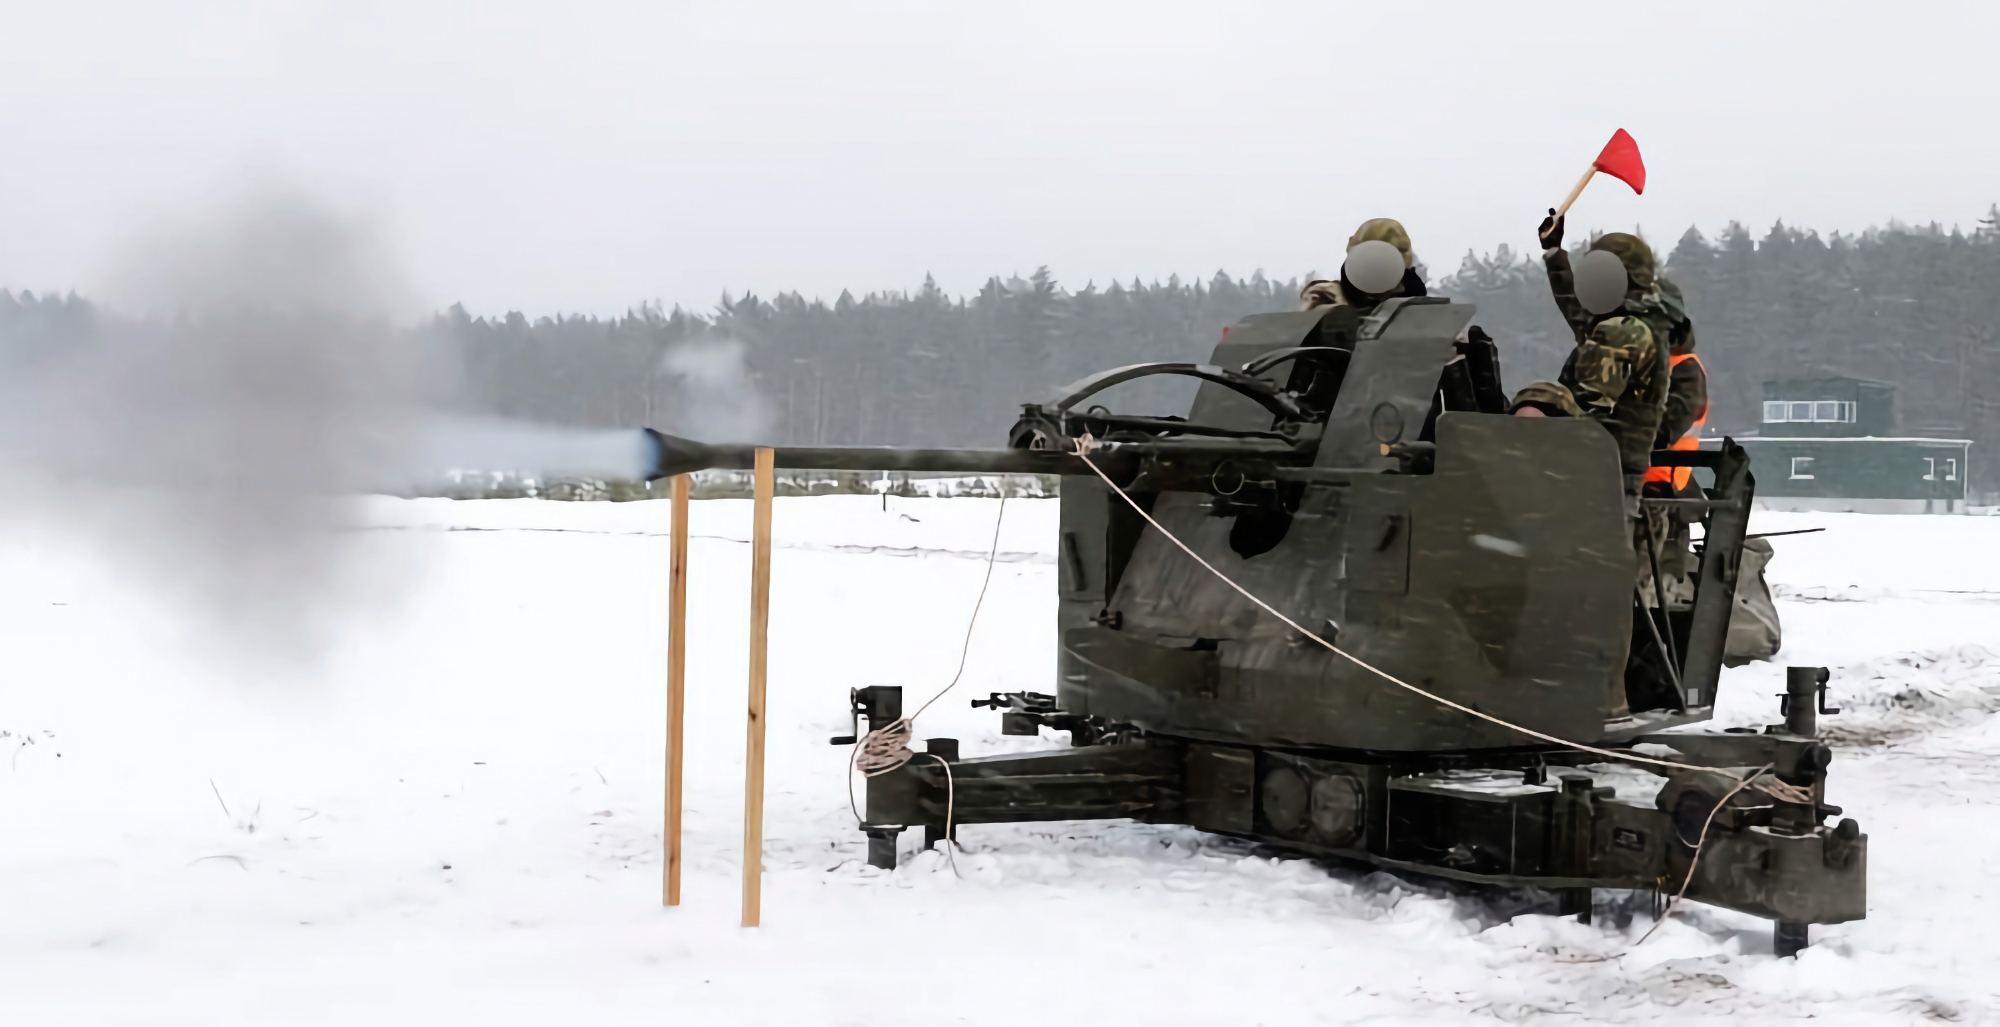 Ukraine receives a batch of Swedish L-70 anti-aircraft guns that can destroy air targets at distances of up to 12.5km